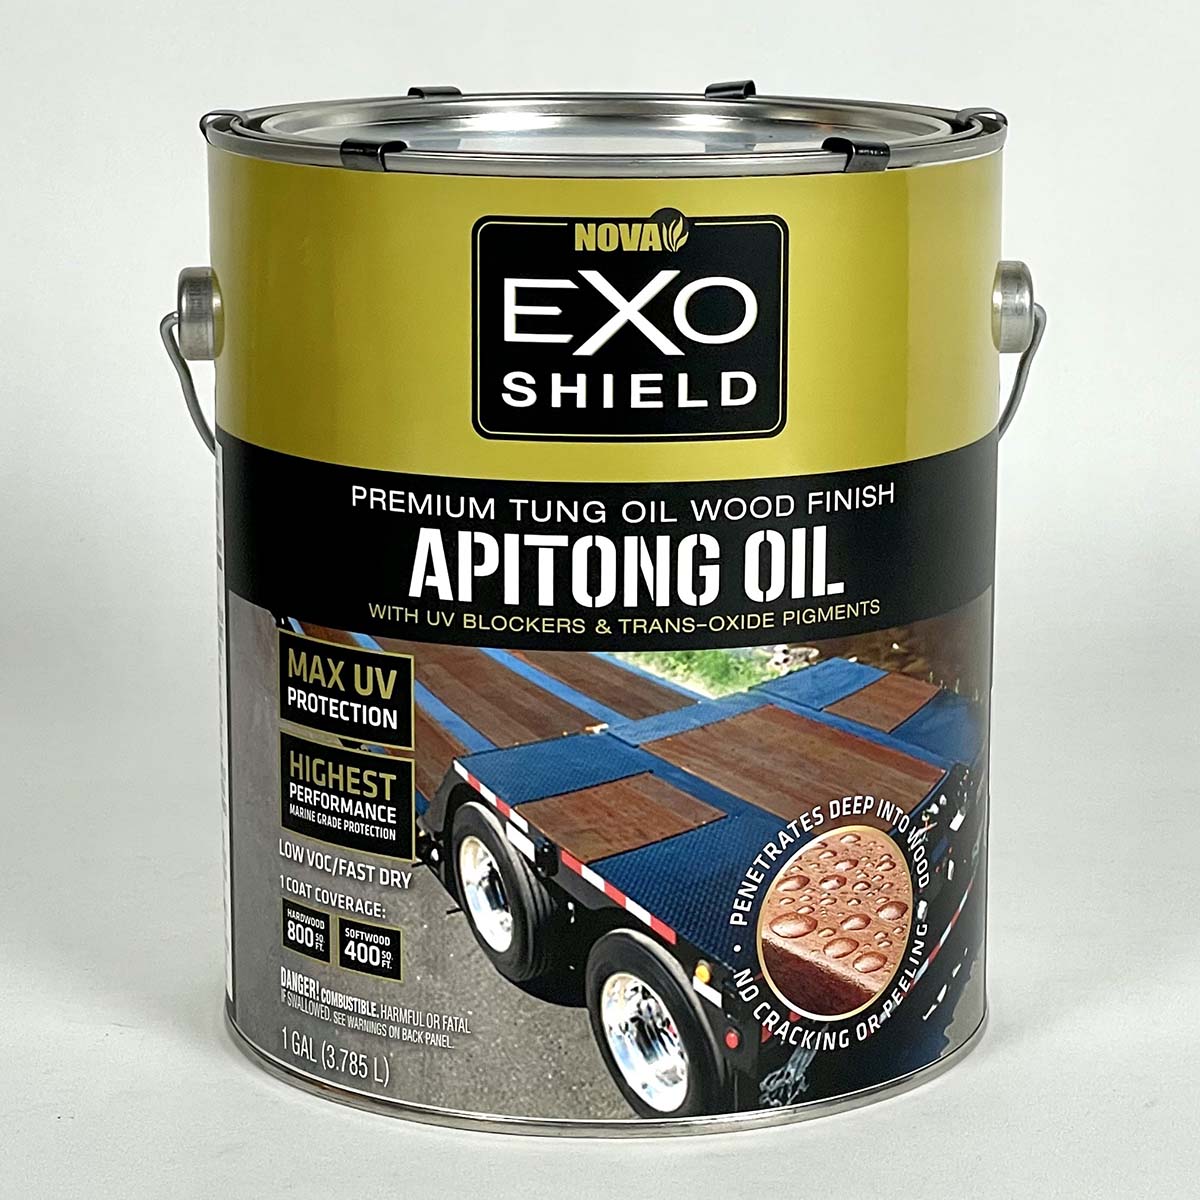 APITONG OIL Exterior Oil Based Wood Stain